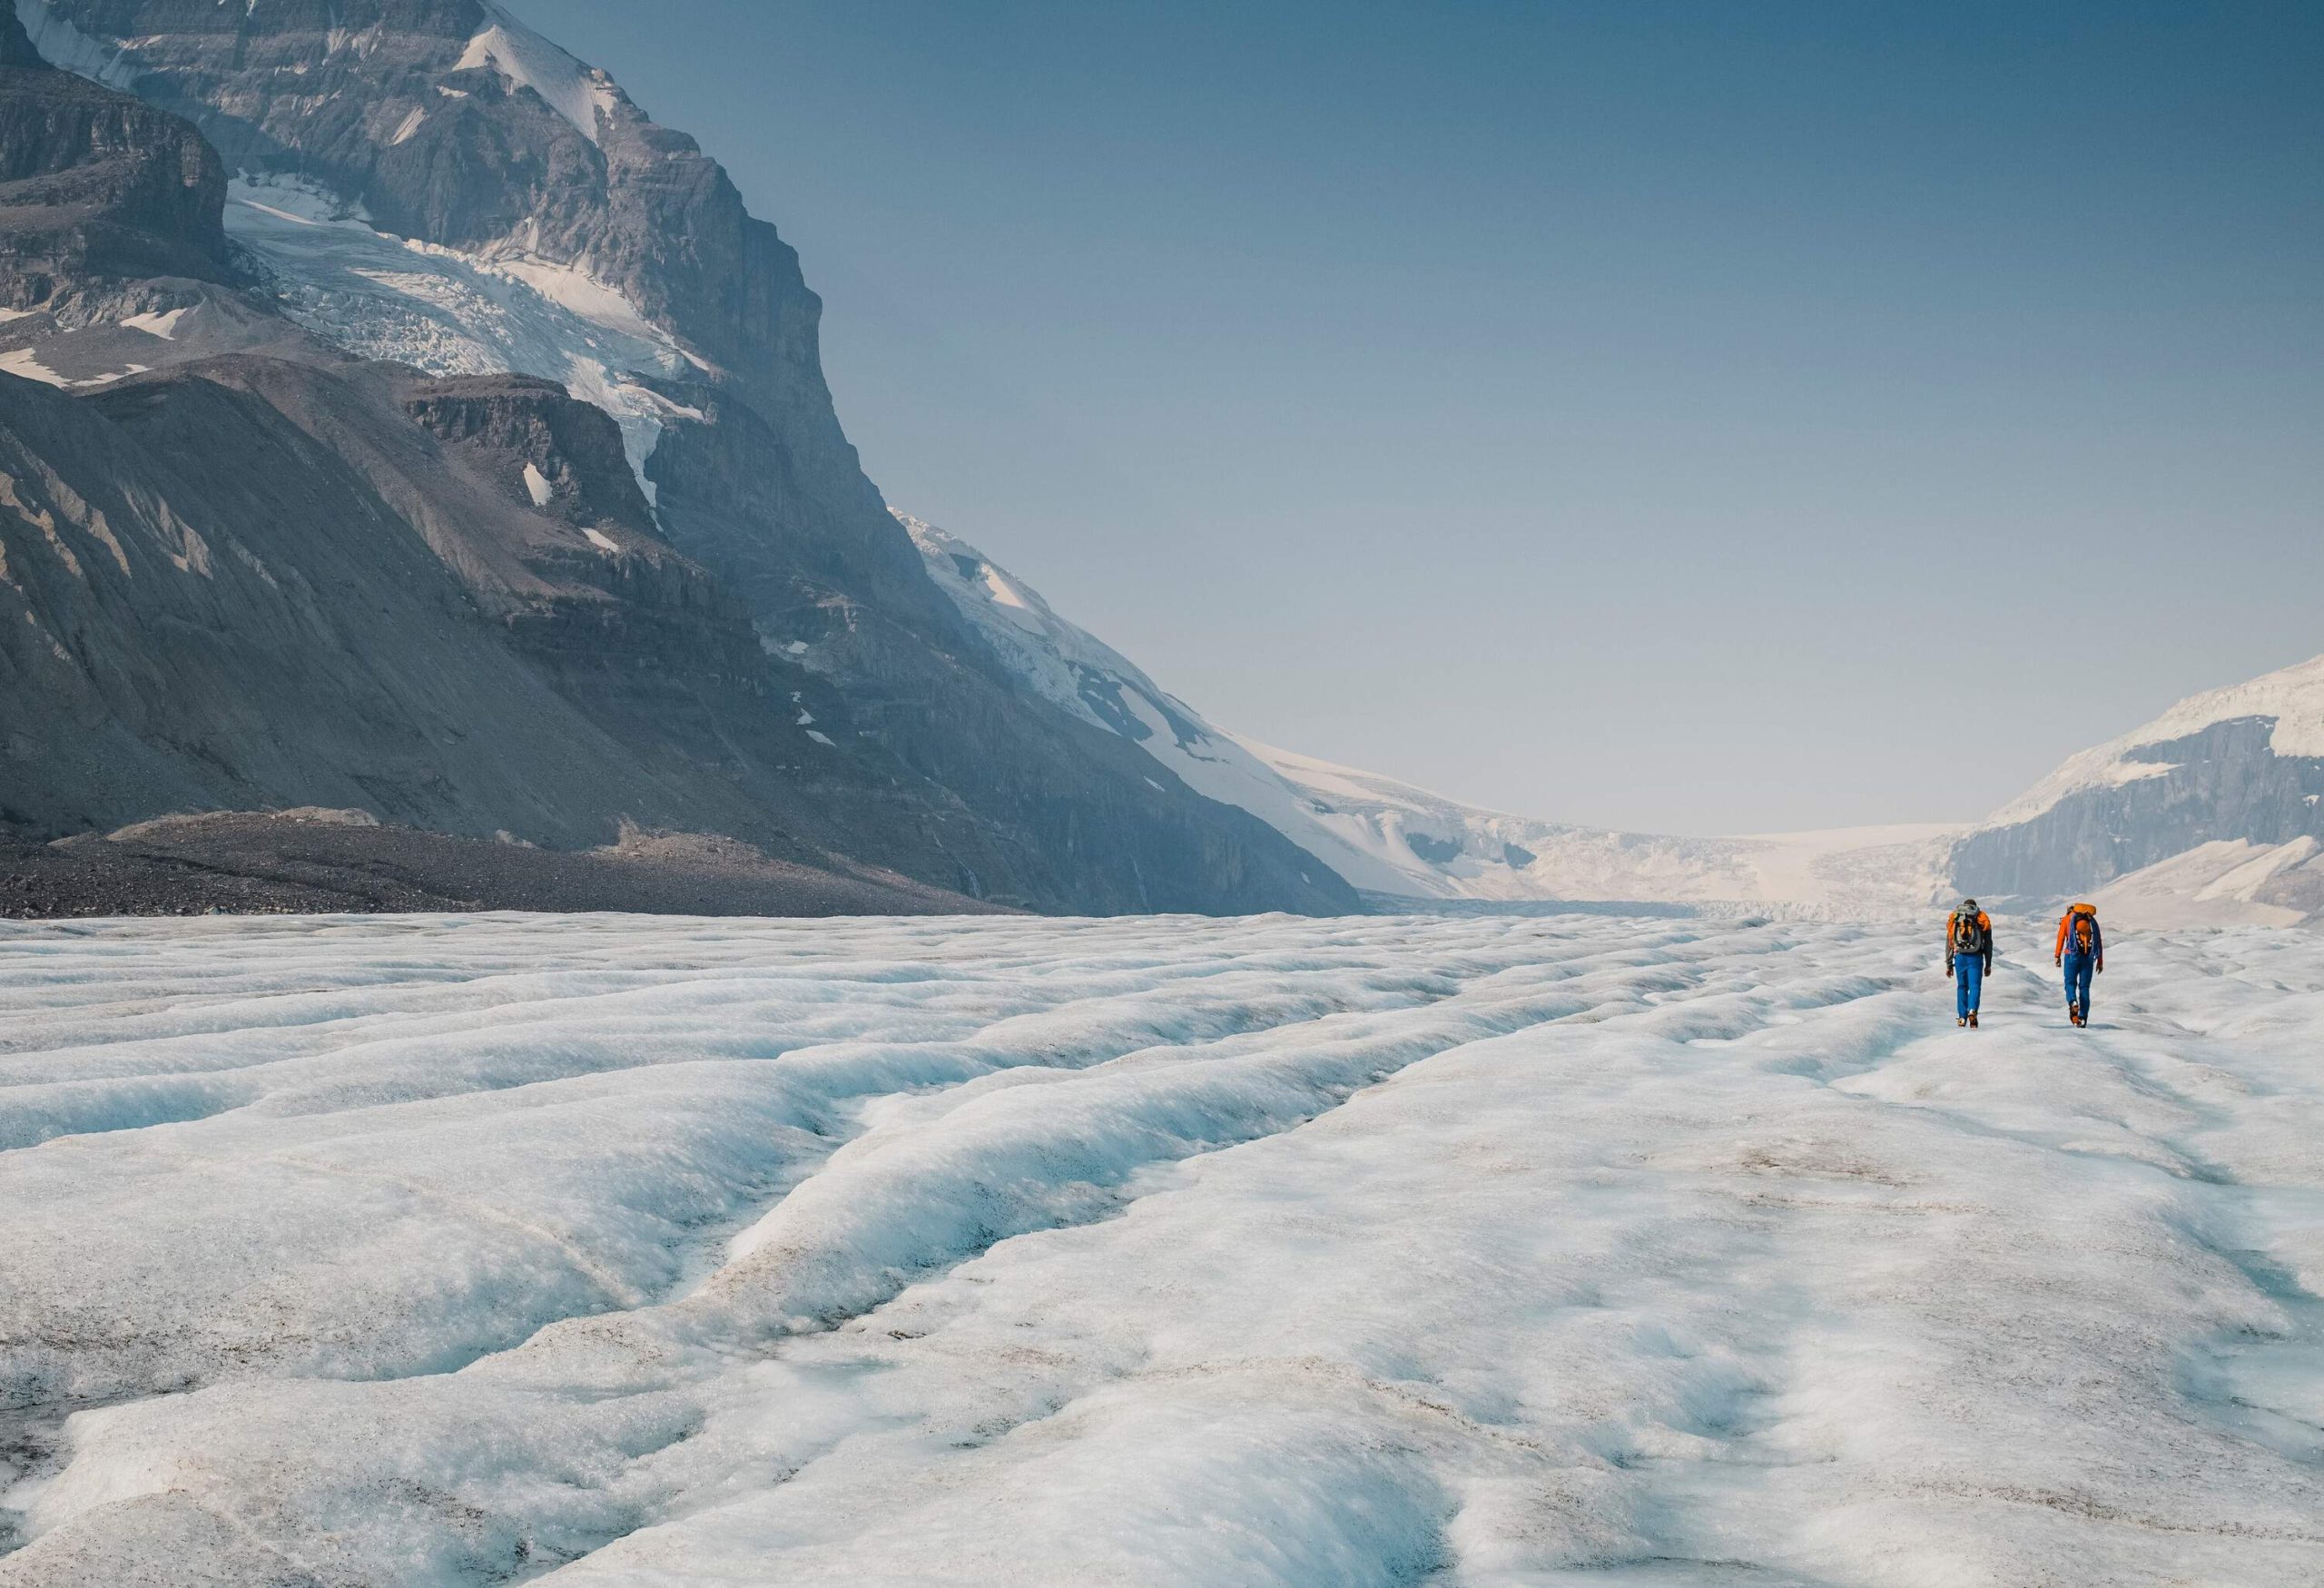 Two people walk on a vast glacier beneath the rocky mountains.